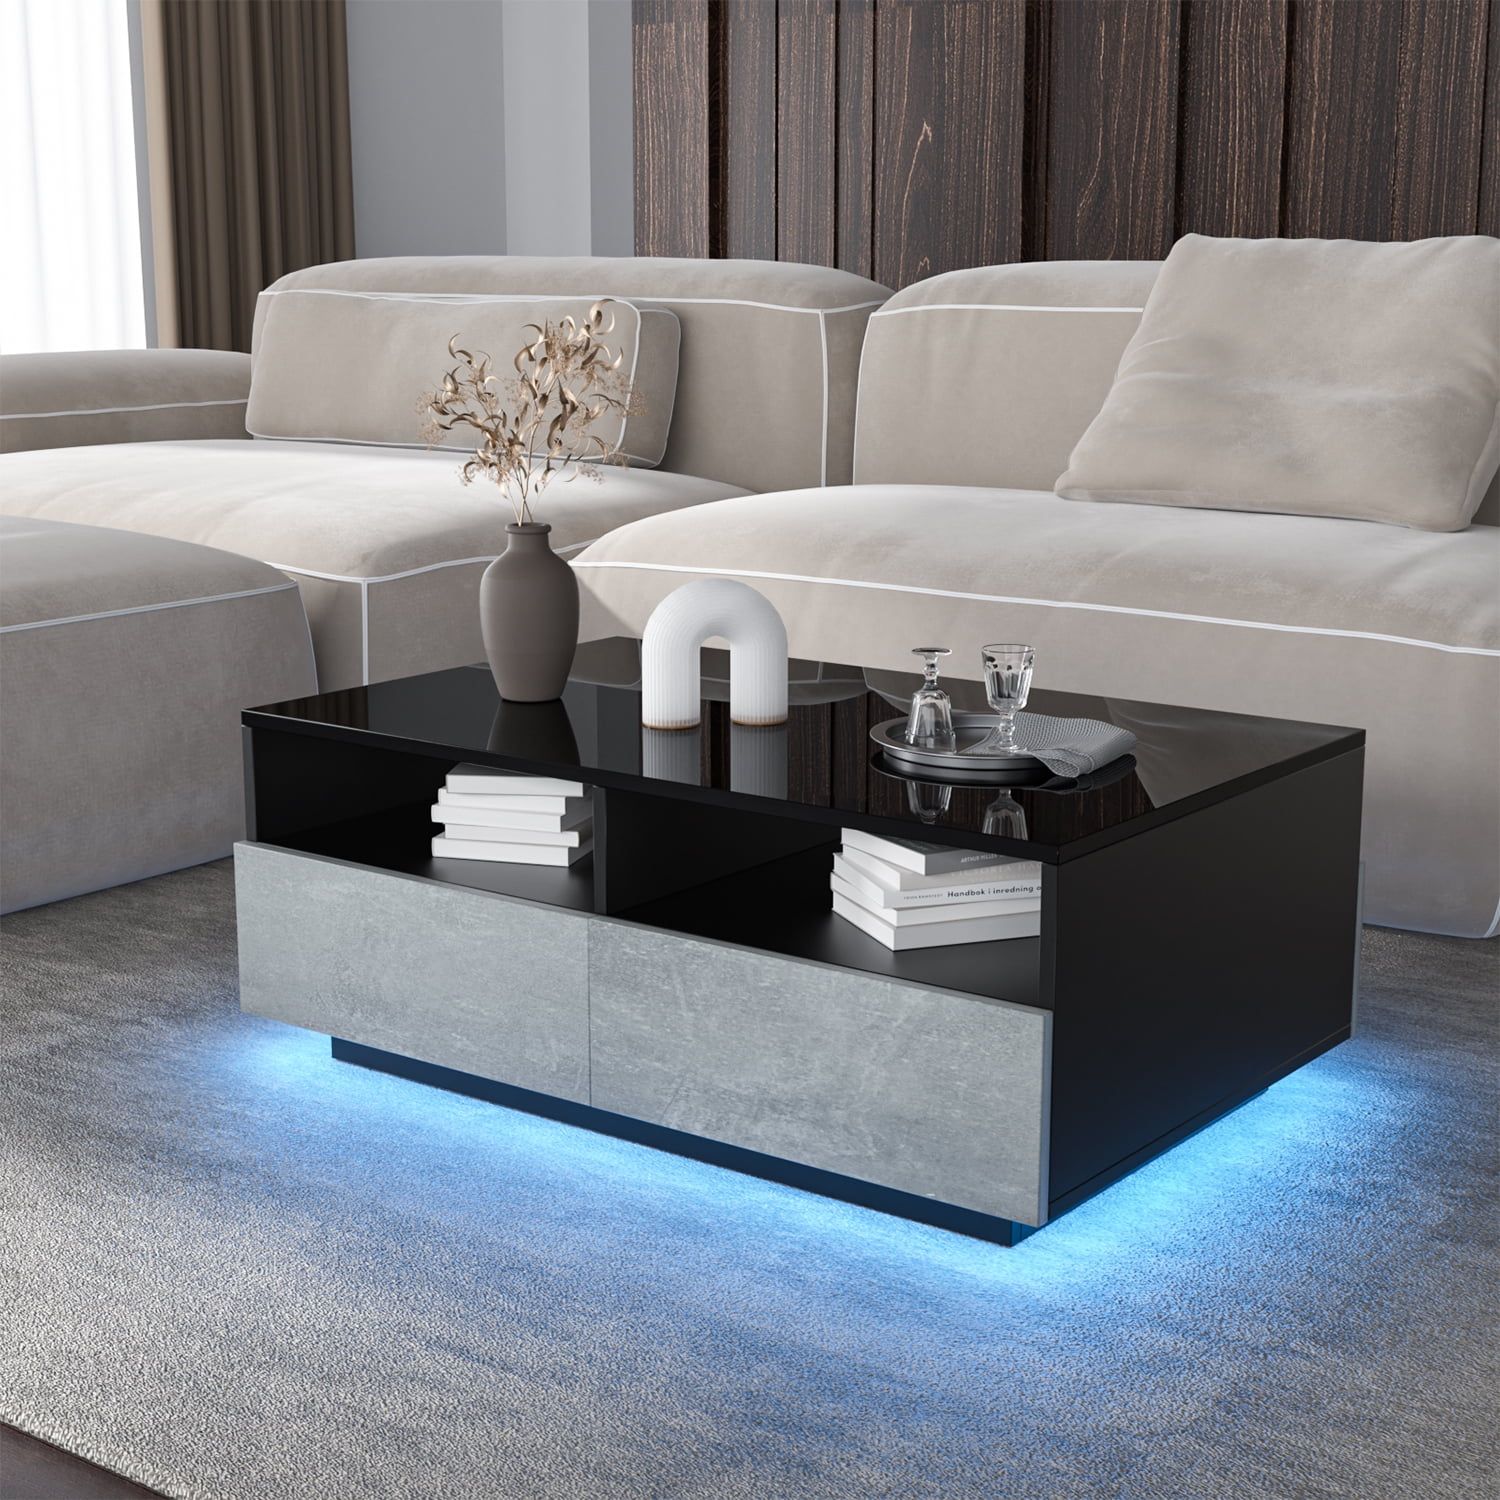 Hommpa Coffee Table Rgb Led Rectangular Center Table With Remote Control  Mordern Sofa Side Cocktail Storage Tables Gray Black For Living Room –  Walmart Inside Rectangular Led Coffee Tables (View 14 of 15)